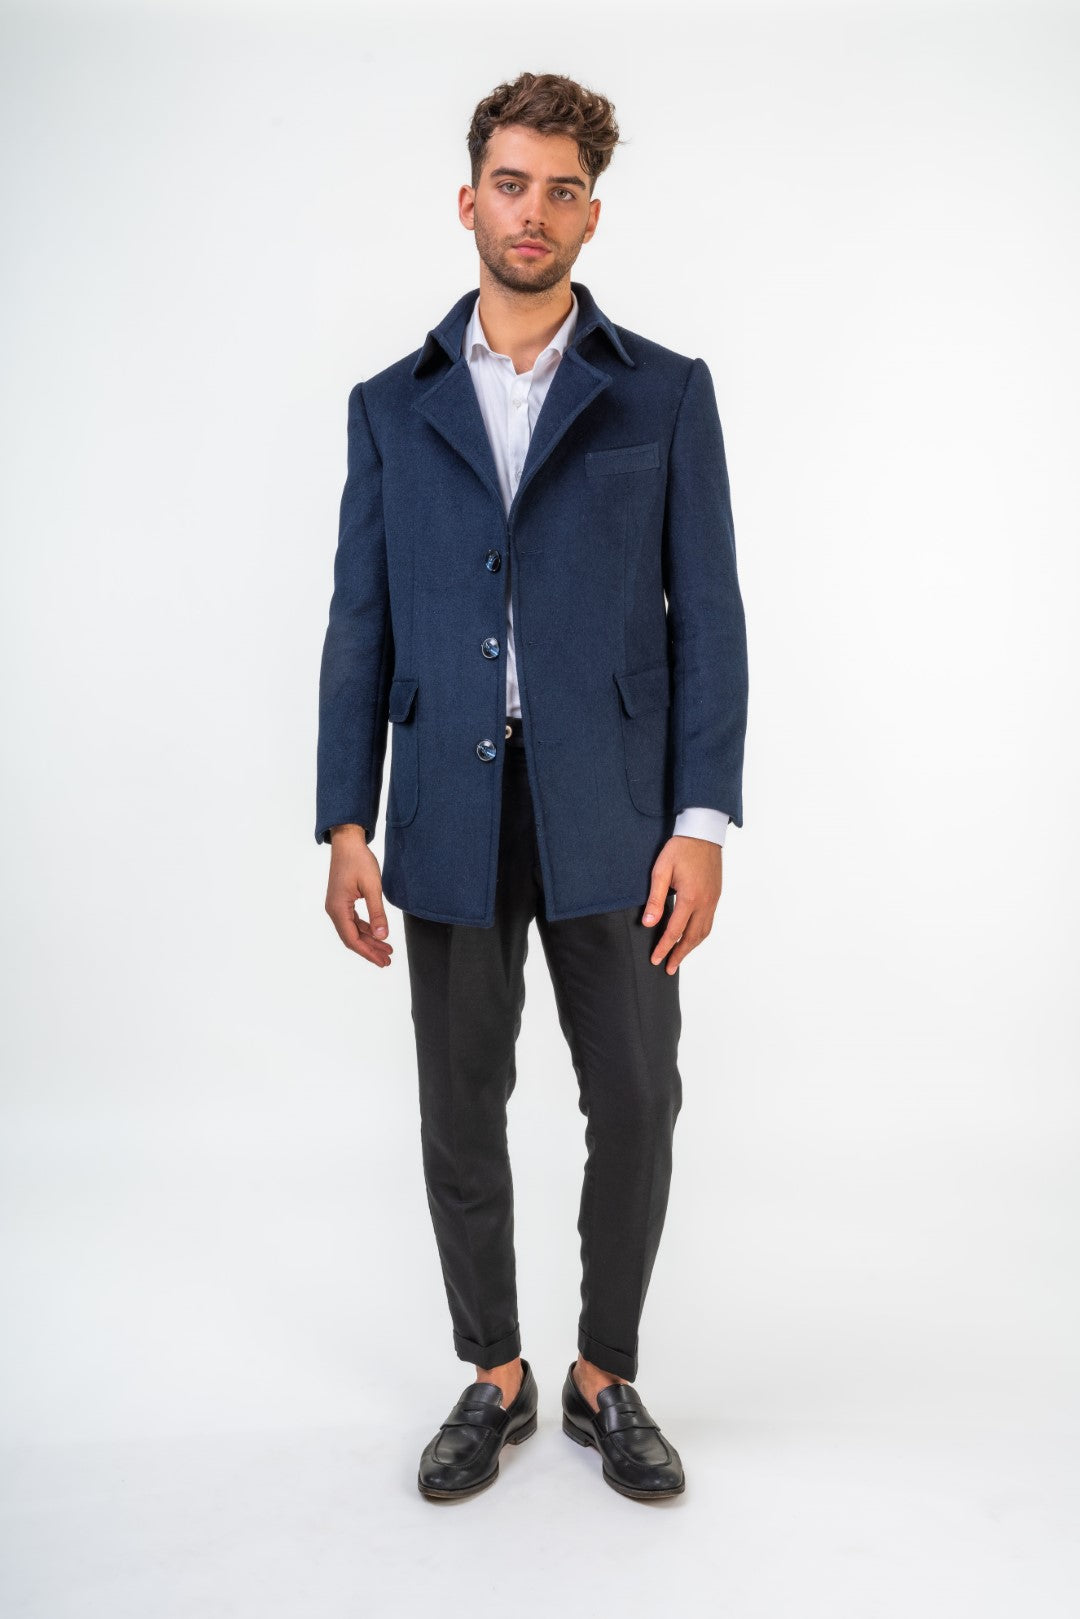 Navy Blue Wool Jacket with Floral Lining